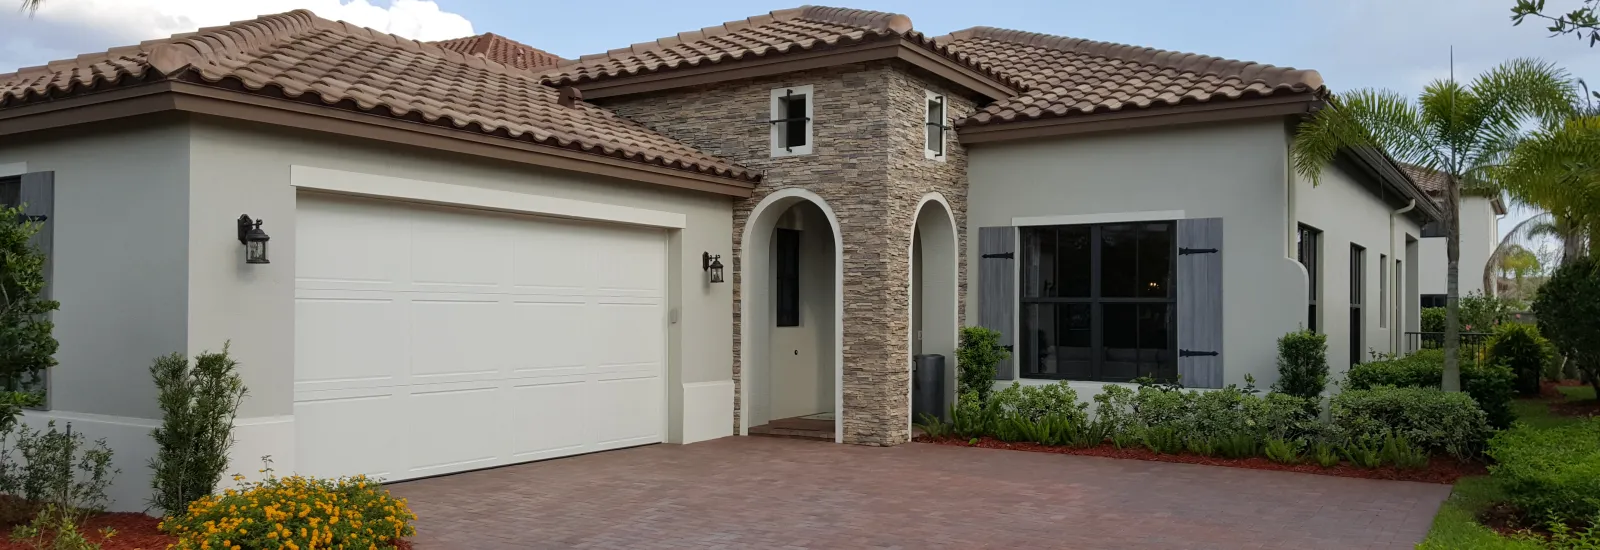 Coral Springs Roofing Services